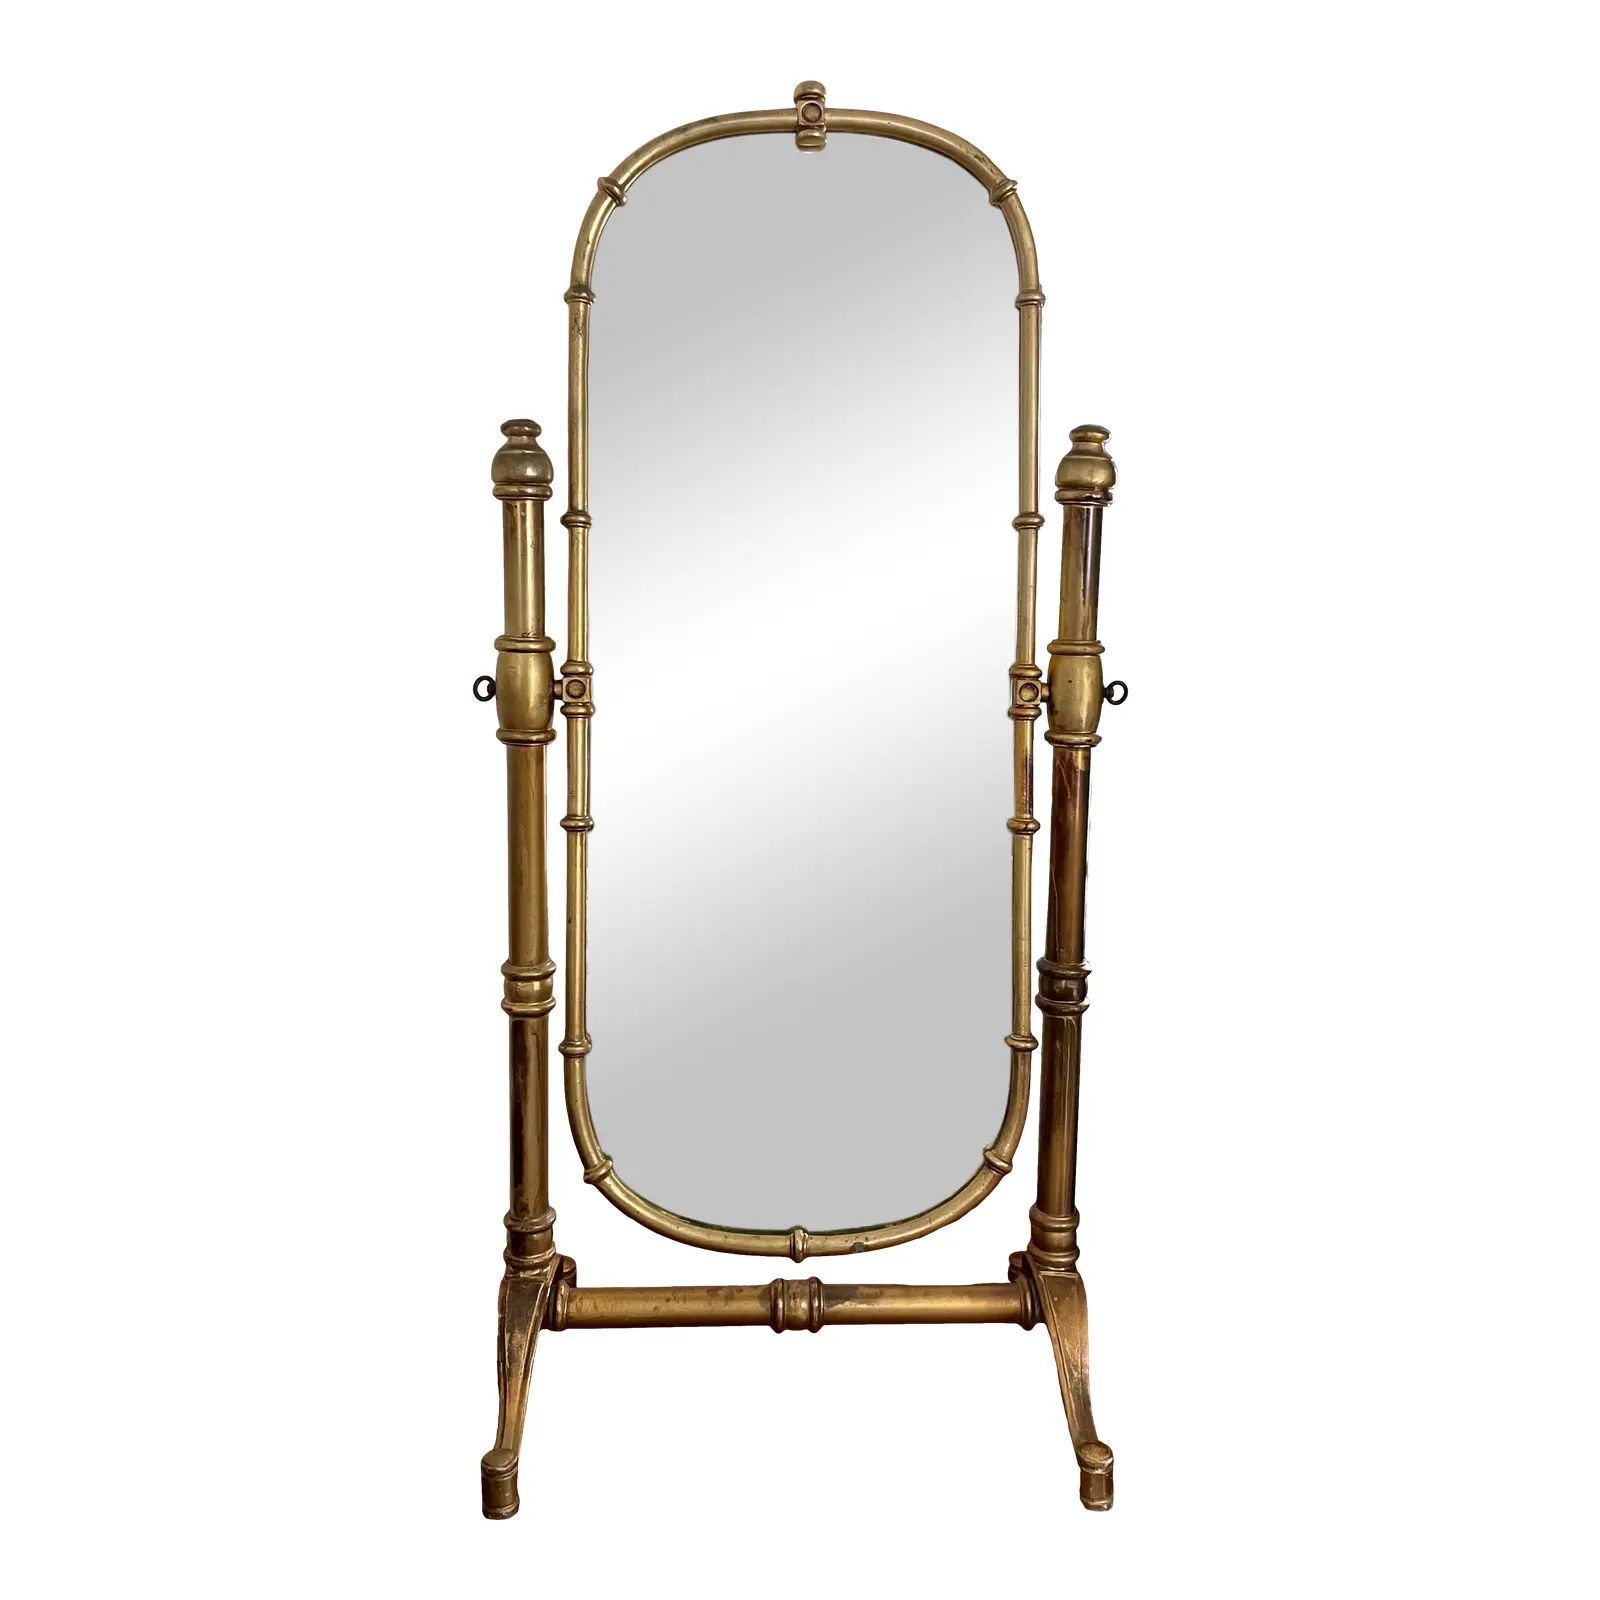 Vintage Campaign-Style Florentine Painted Cheval Faux Bamboo Detail Floor Mirror | Chairish